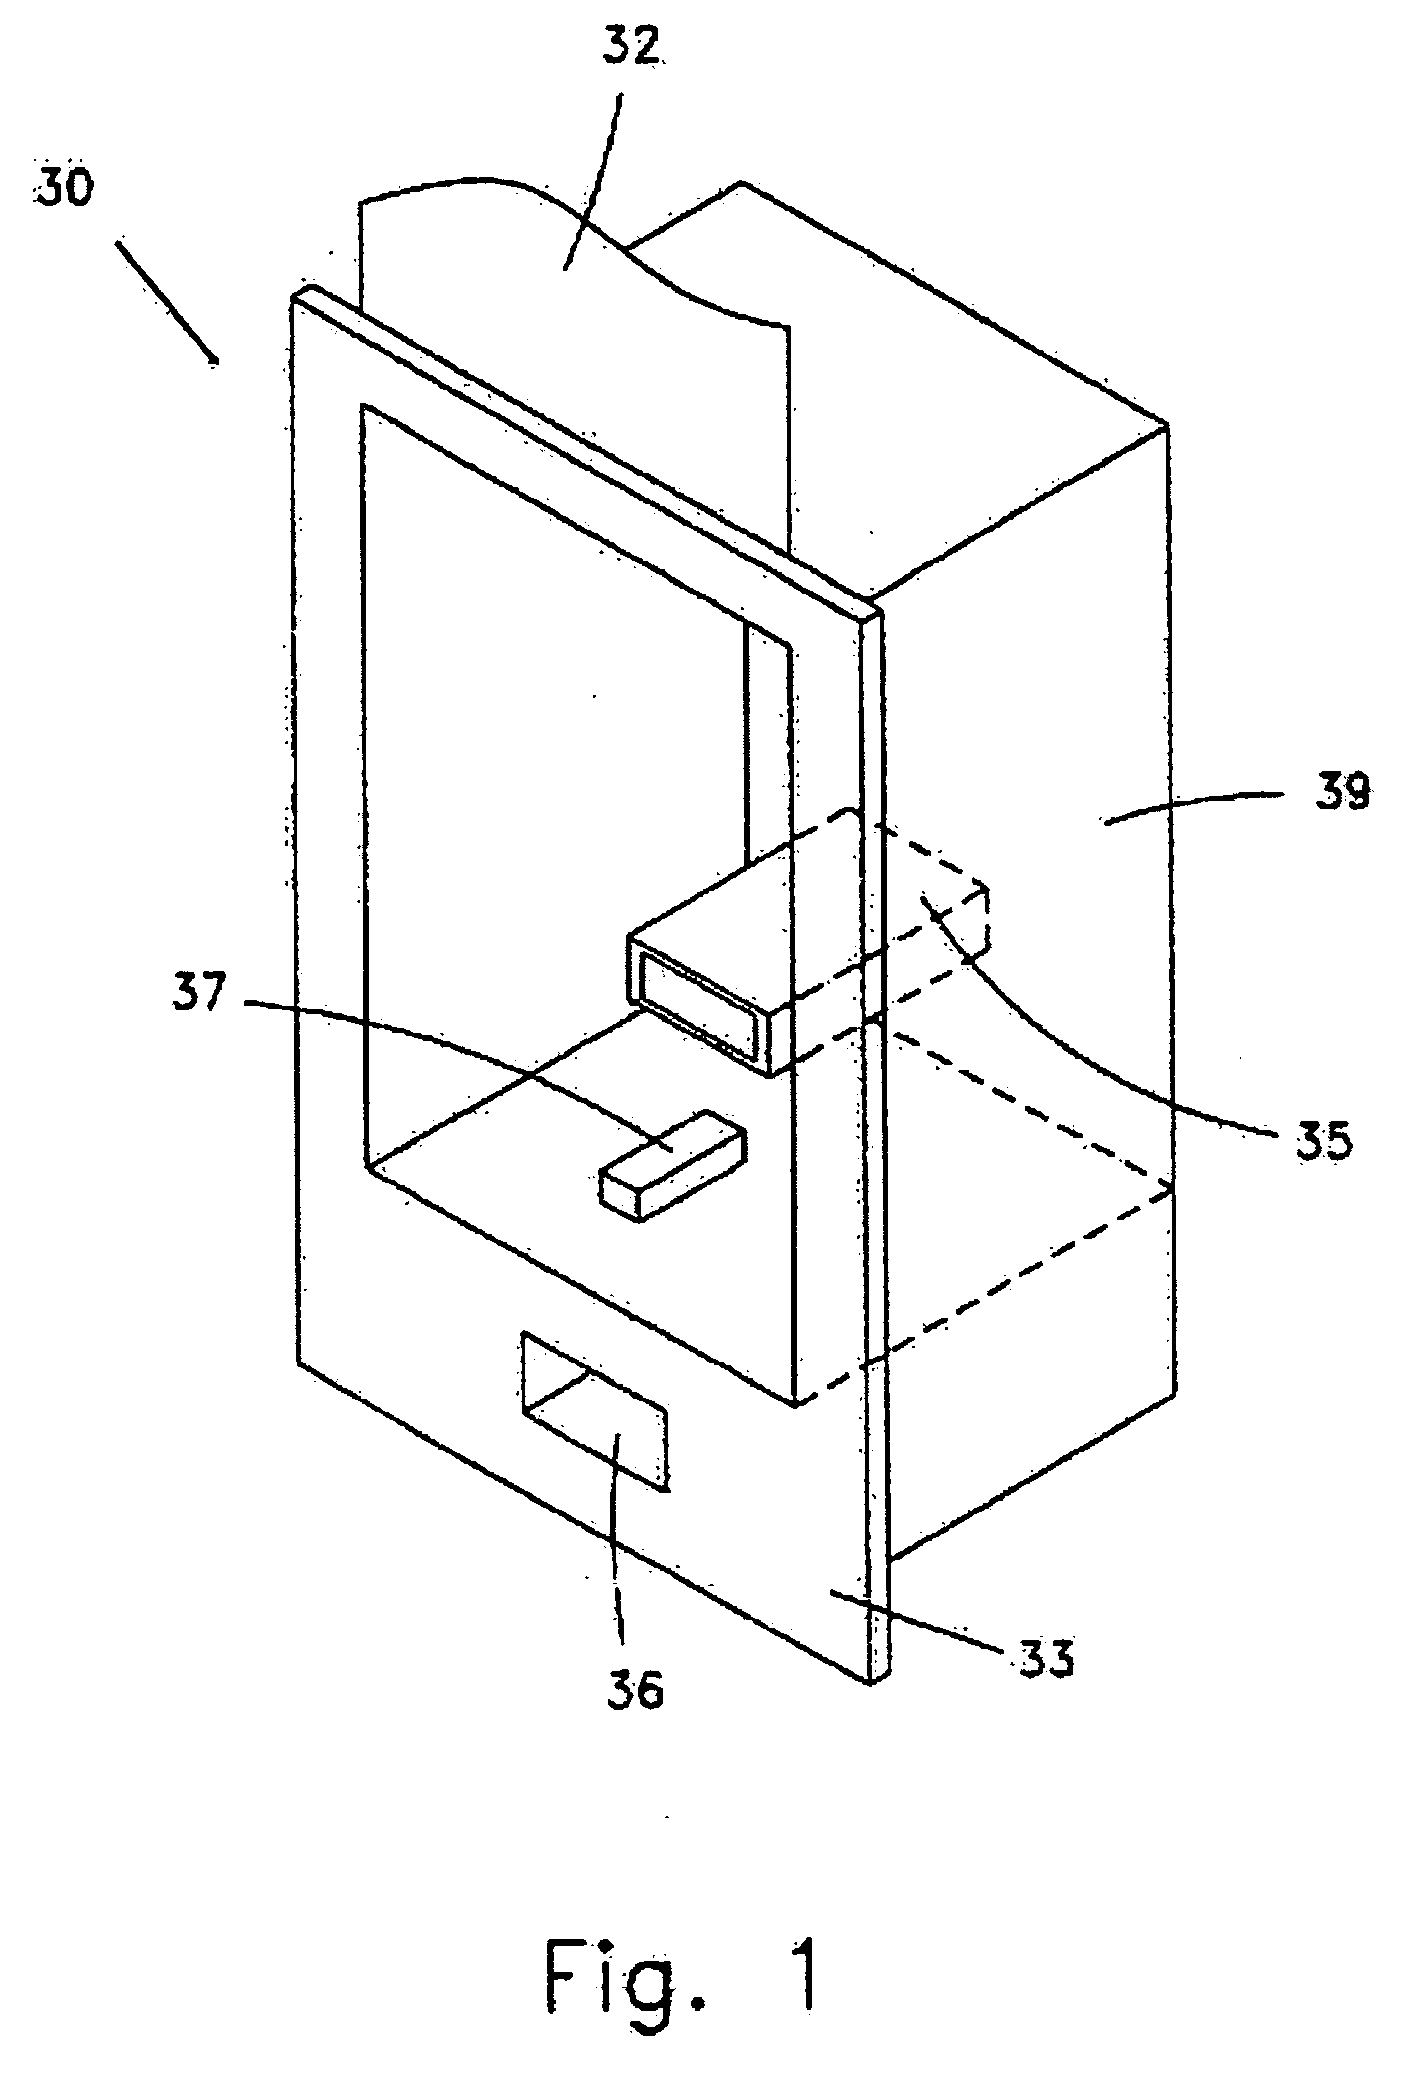 Apparatus for allowing handheld wireless devices to communicate voice and information over preexisting telephone lines